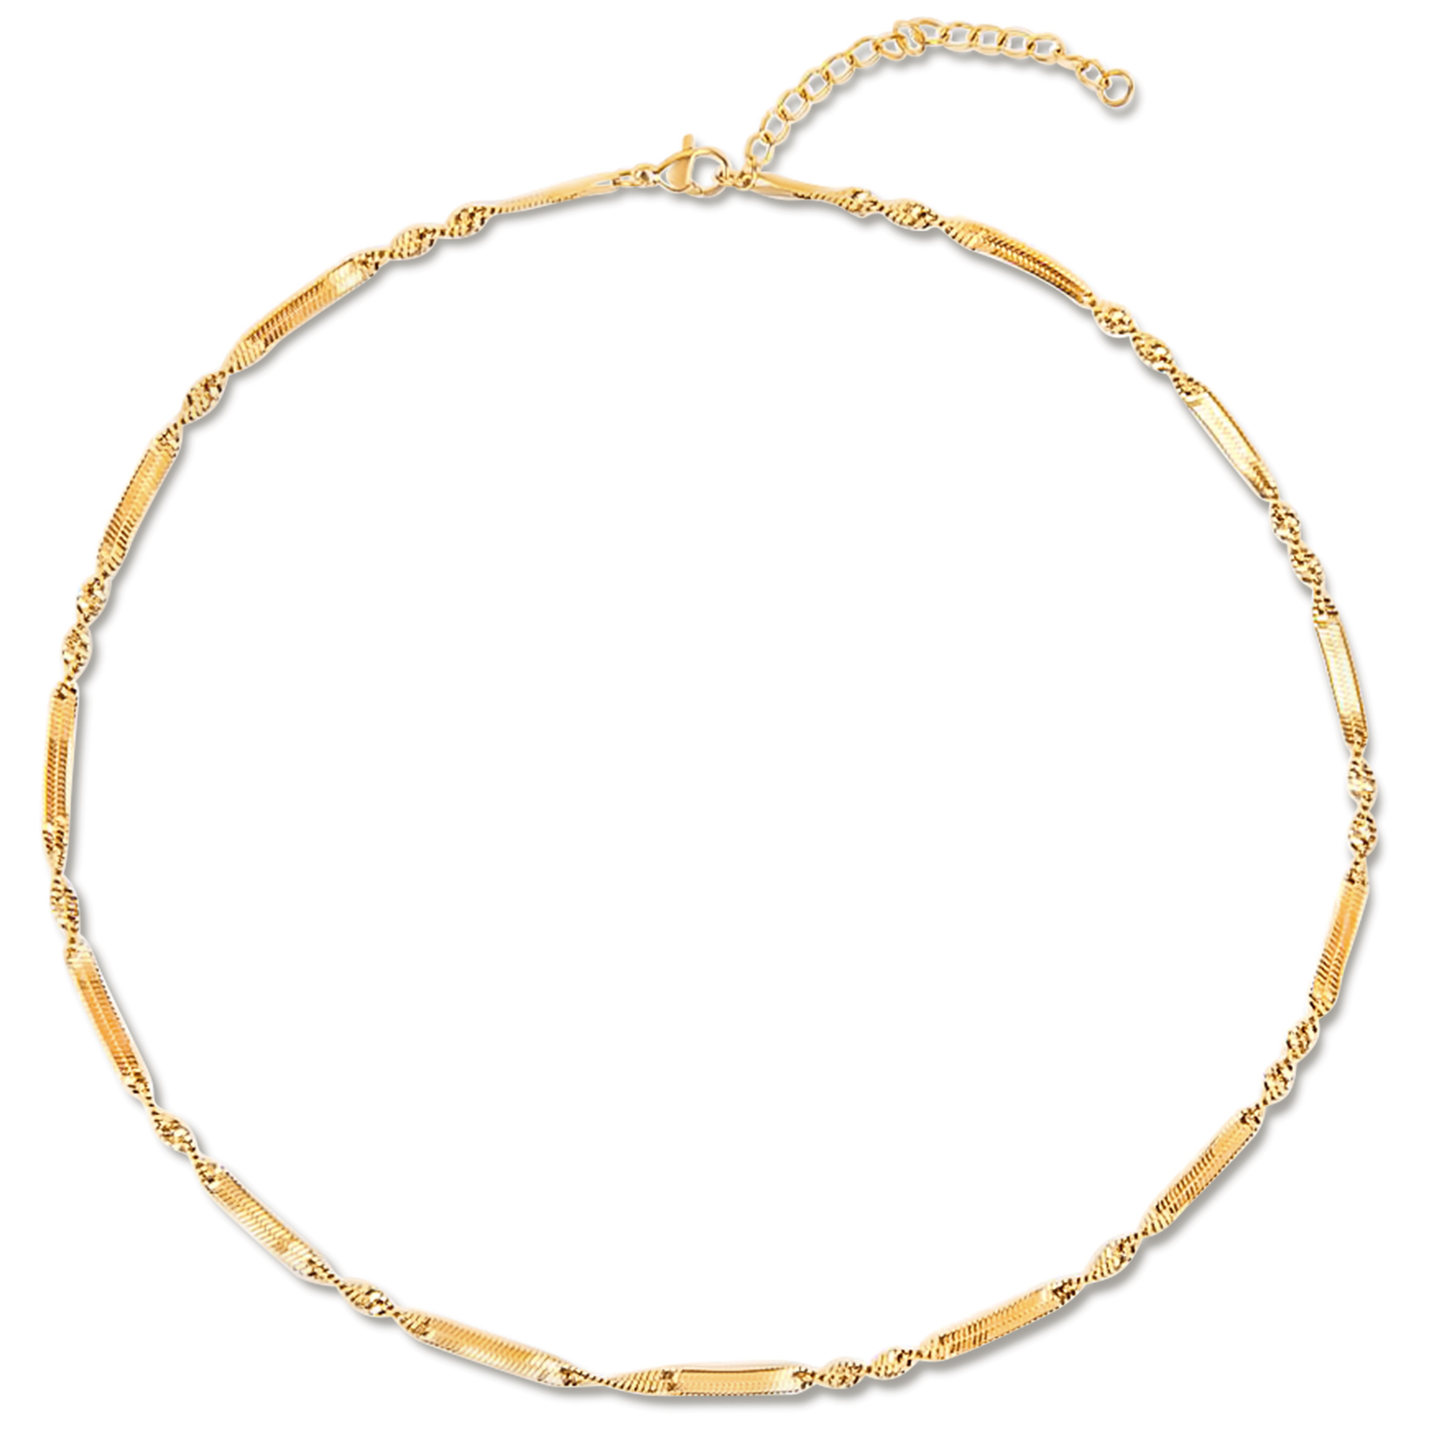 Ellie Vail - Everette Twisted Herringbone Chain Necklace